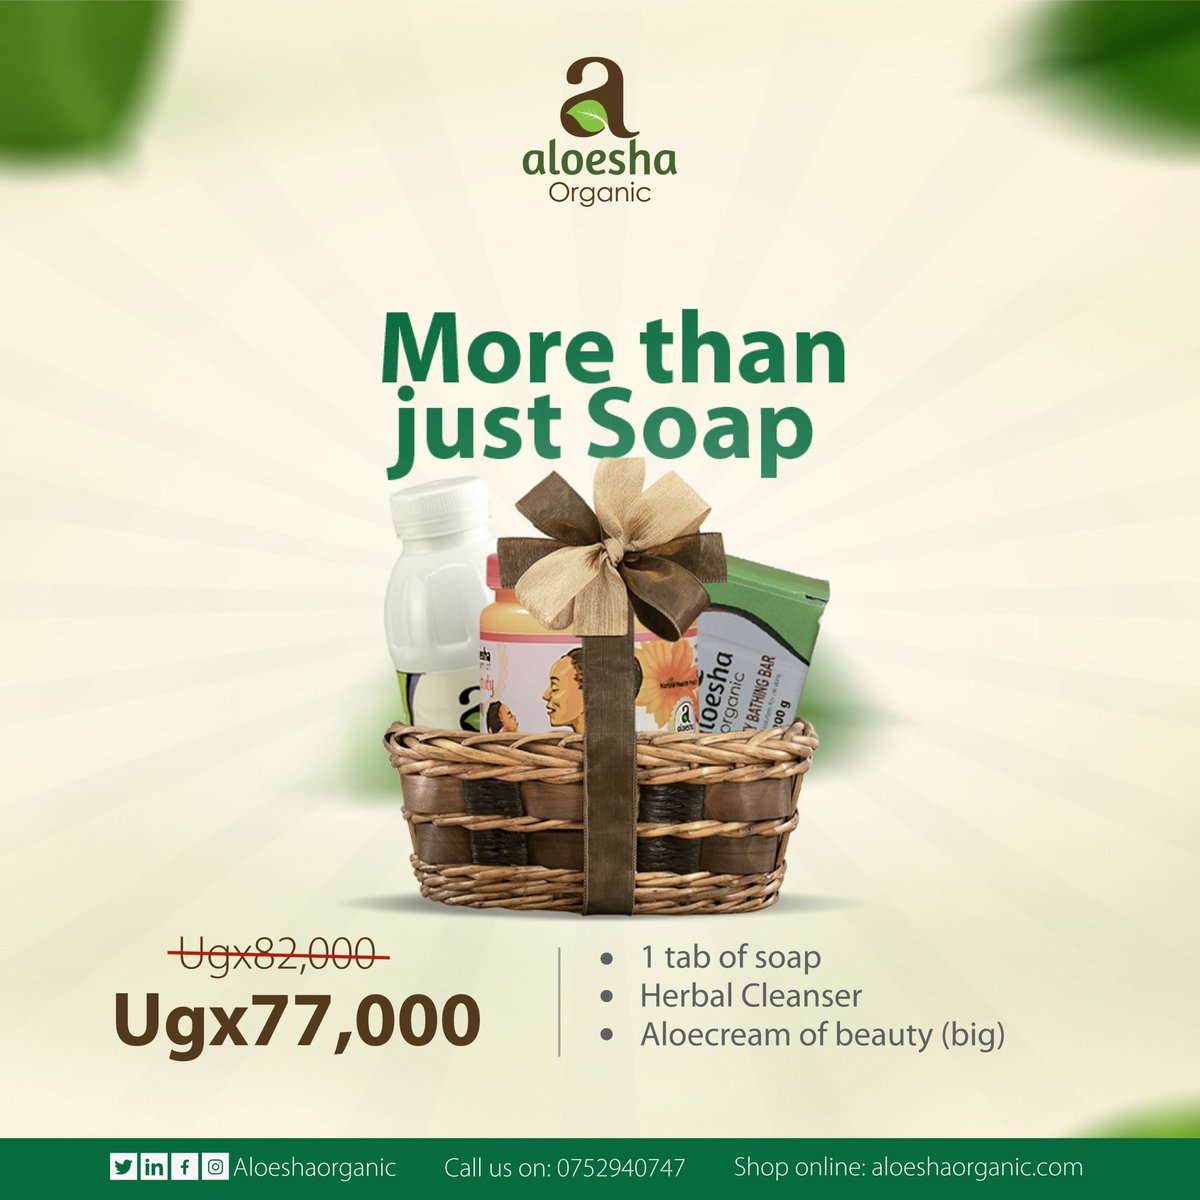 Good morning! Don't miss out on the opportunity to get a hamper with all your natural beauty essentials, including: 1. Soap 2. Herbal cleanser 3. A large tin of Aloecream of Beauty, all for just Ugx77,000. For more details, call or WhatsApp 0752940747. #herbalife